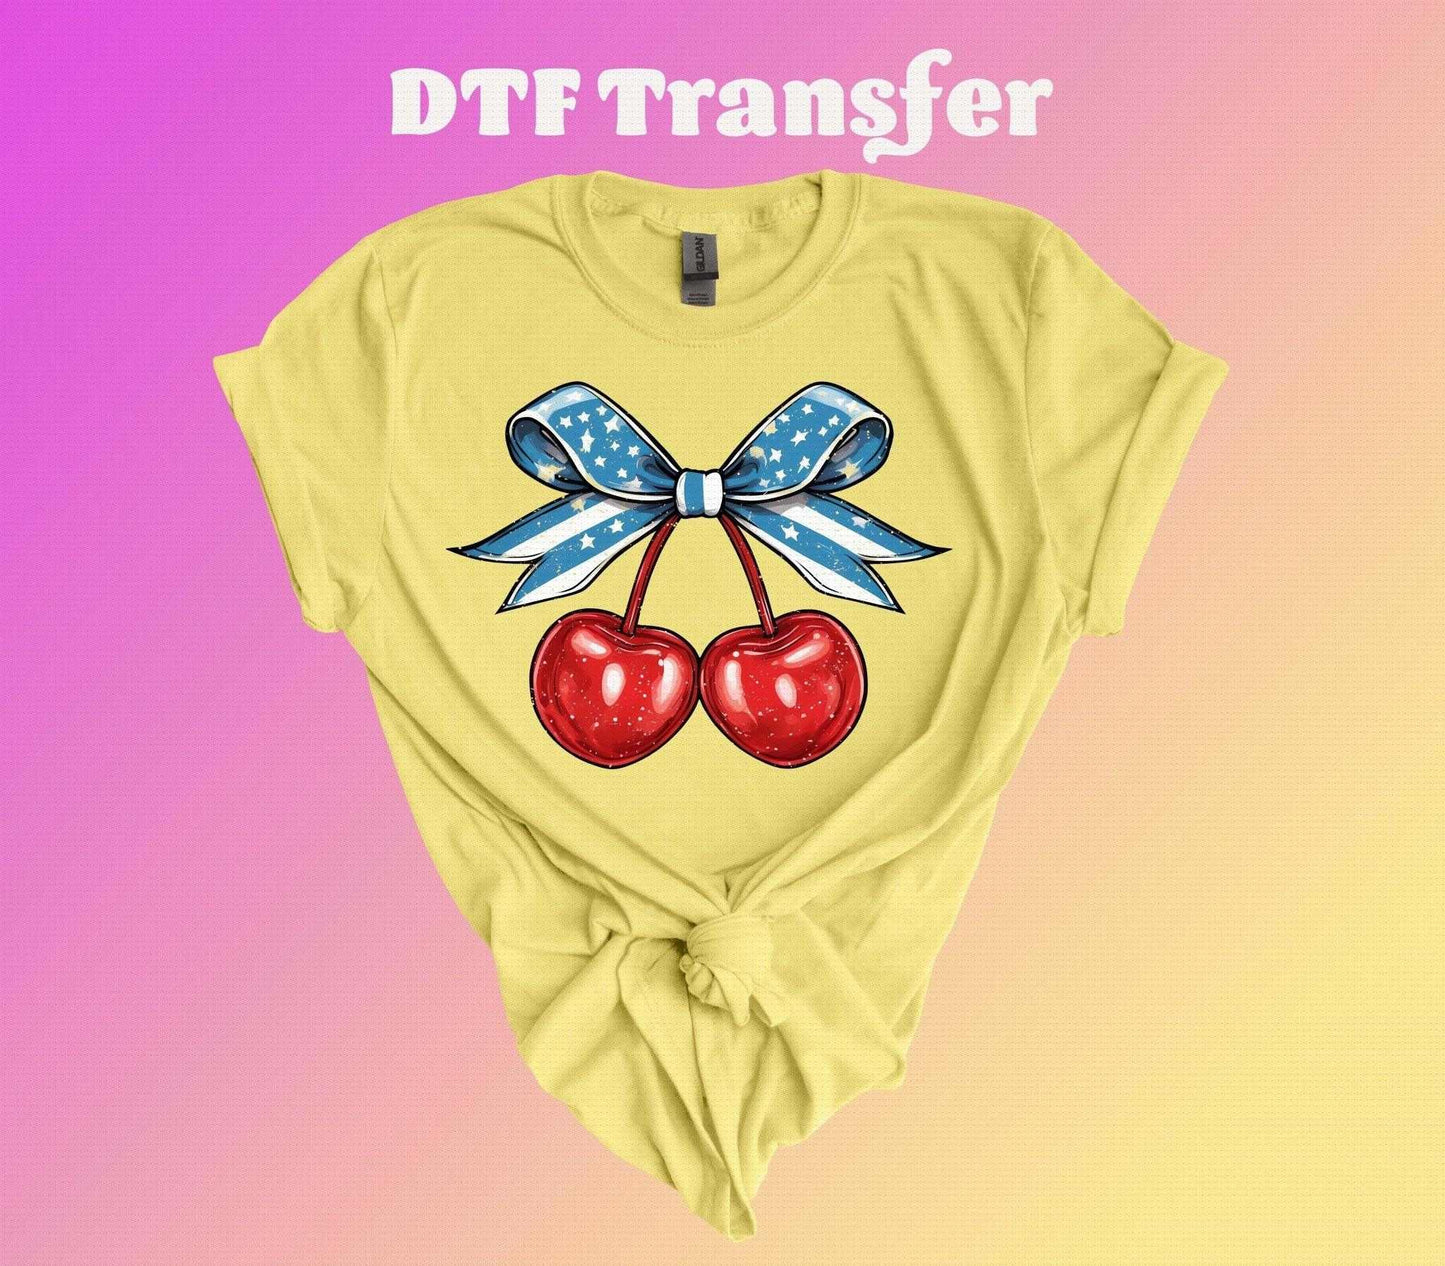 Coquette Heart Shaped Cherry DTF Transfer - Imagine With Aloha